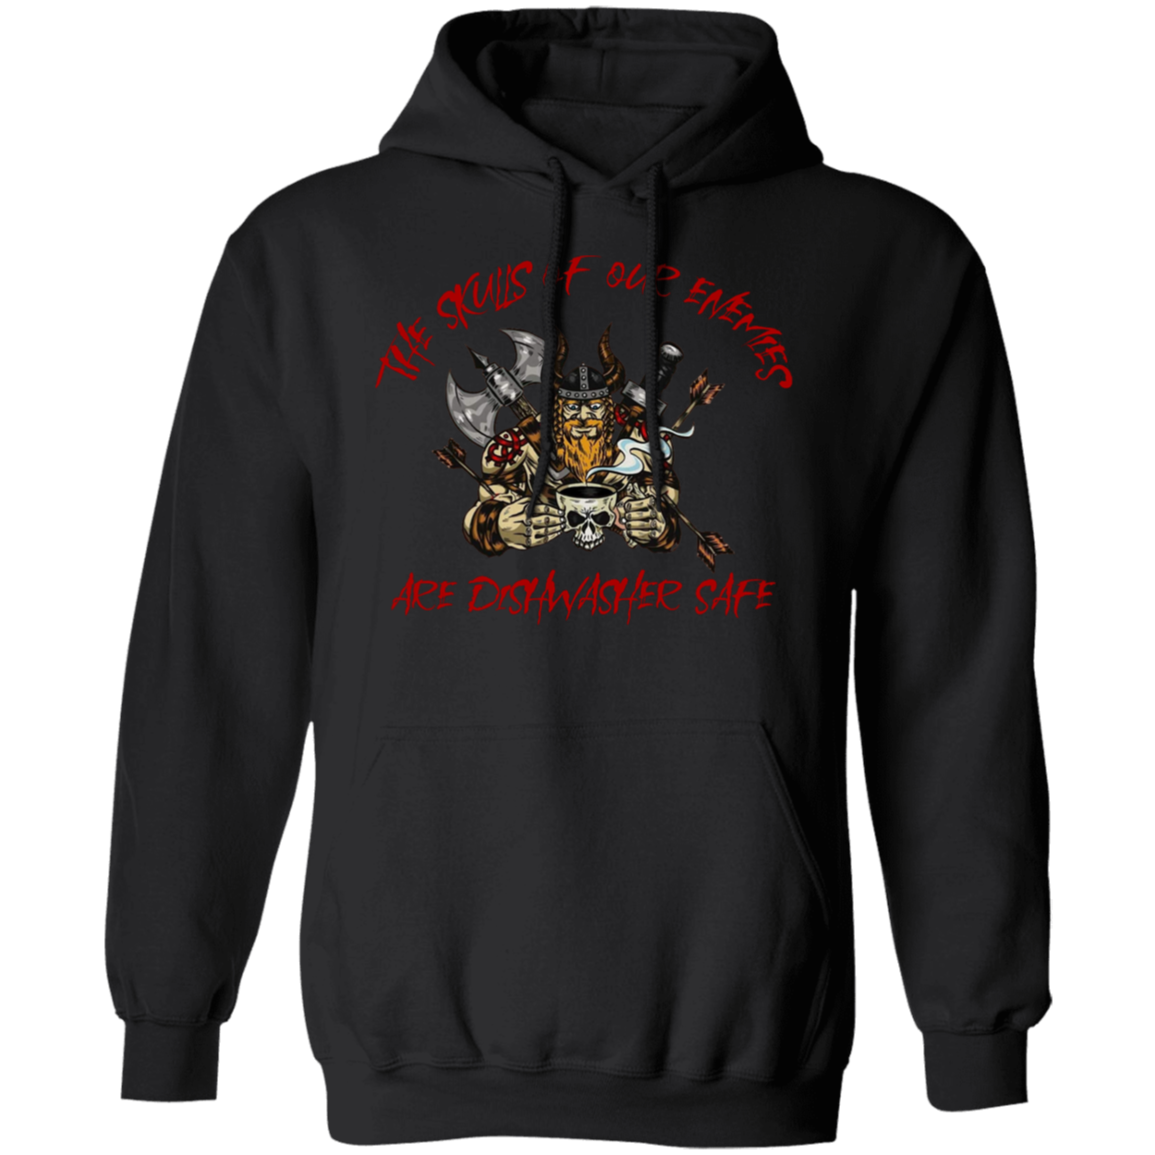 The Skulls of Our Enemies Are Dishwasher Safe Pullover Hoodie - Hoodies Black / M Real Domain Streetwear Real Domain Streetwear